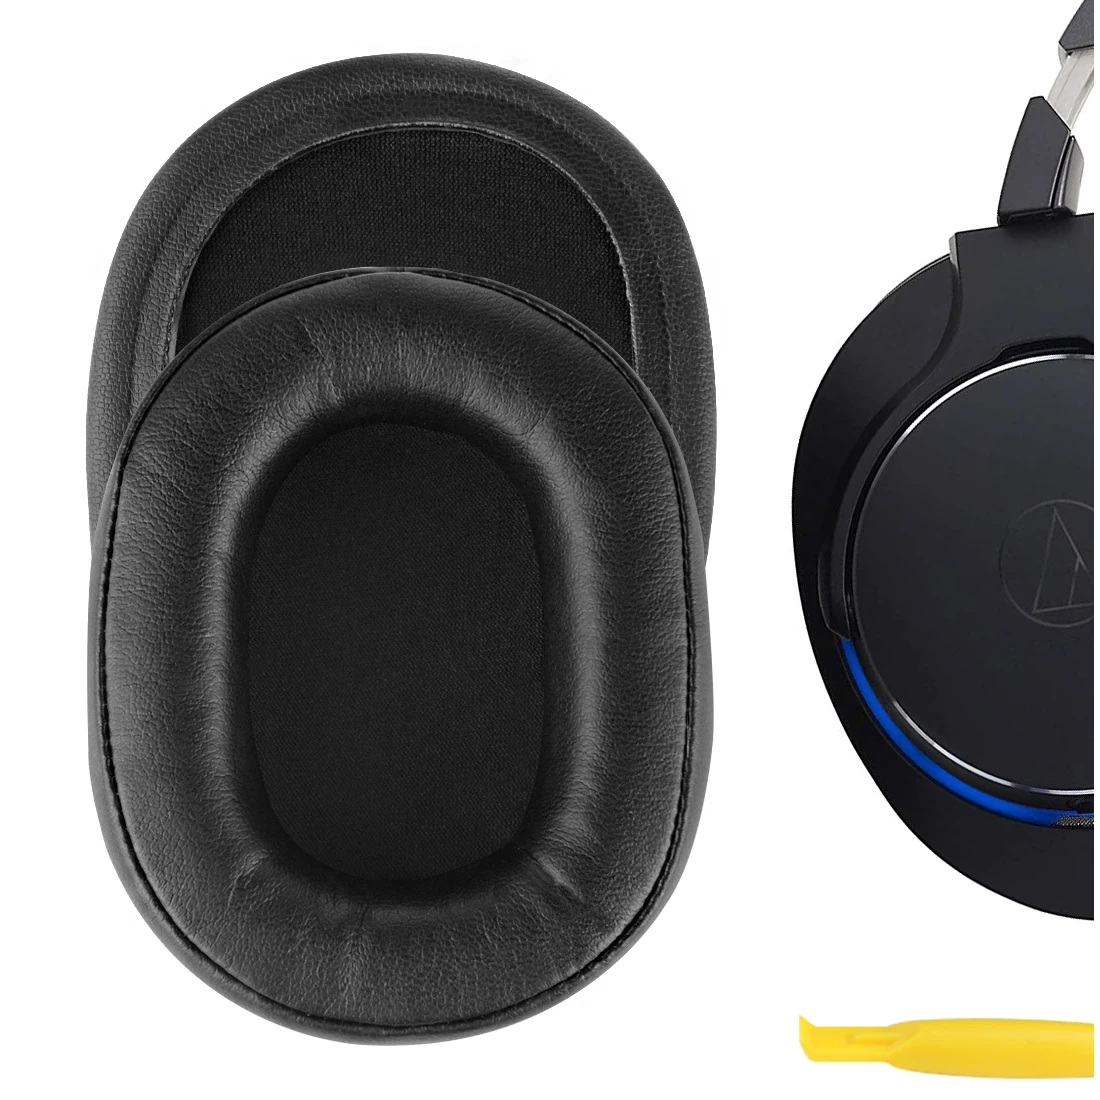 

Geekria Earpads for ATH-MSR7 MSR7NC MSR7BK Headset Replacement Headphones Protein Leather Ear Pads Cover Cushions Foam Earmuff